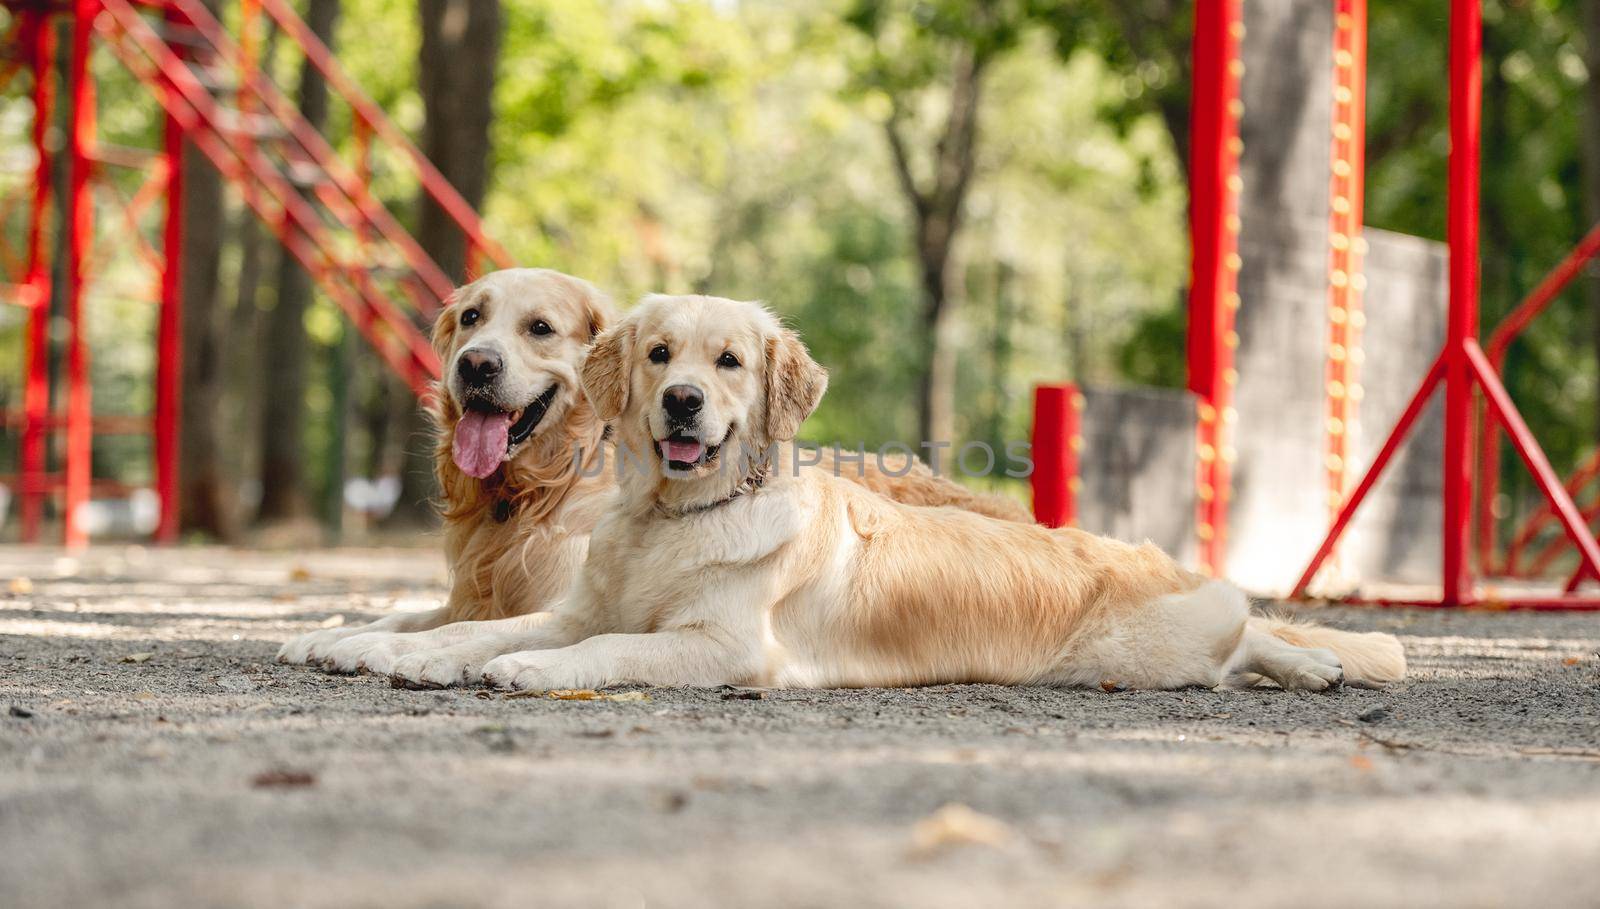 Two golden retriever dogs lying outdoors. Cute purebred pets labradors posing in the park